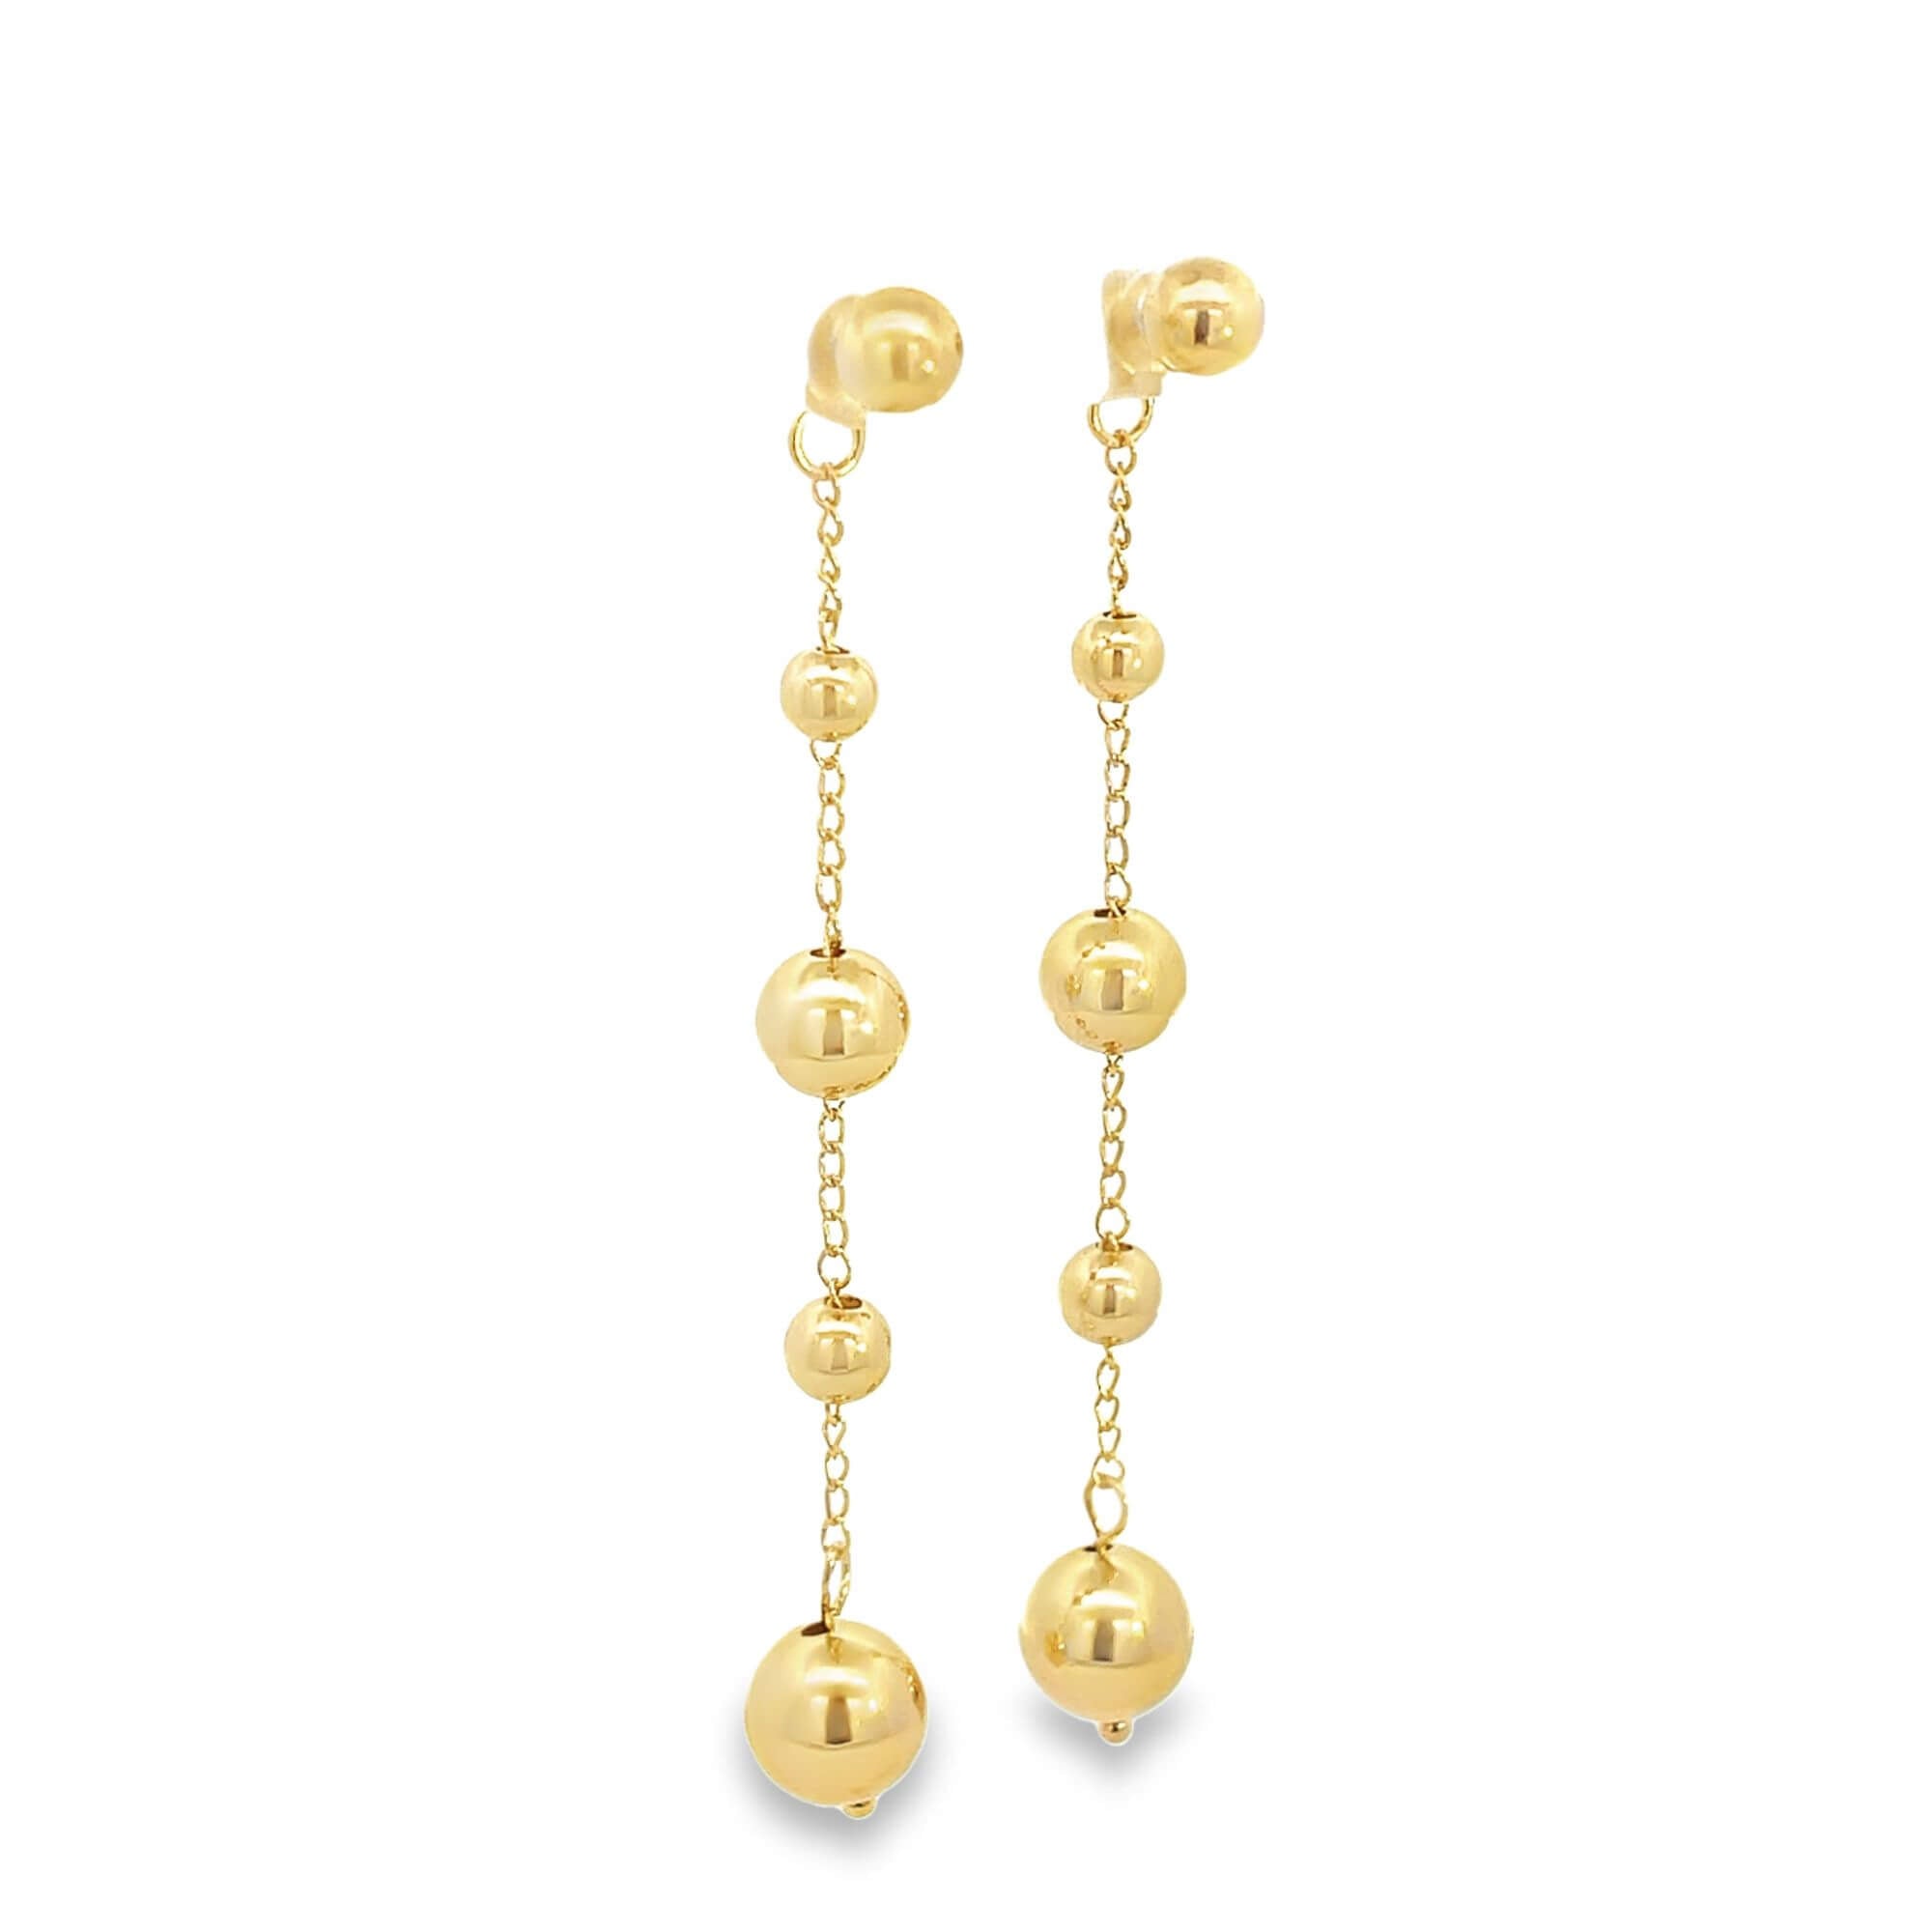 Link Chain Pearl and Bead Dangle Earrings (L138A)(L163A)